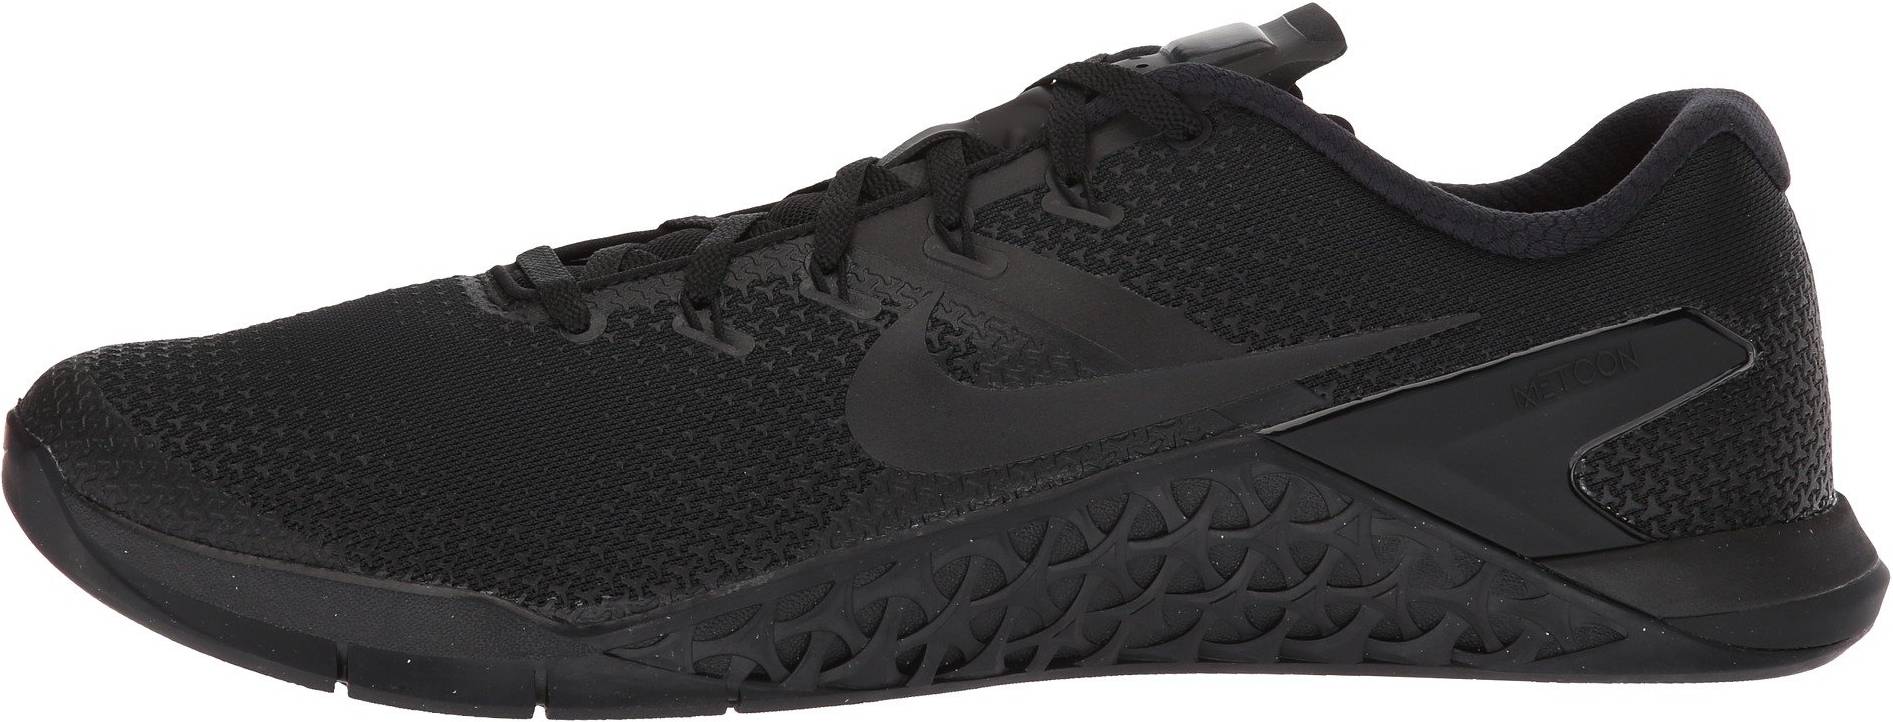 Save 50% on Nike Crossfit Shoes (17 